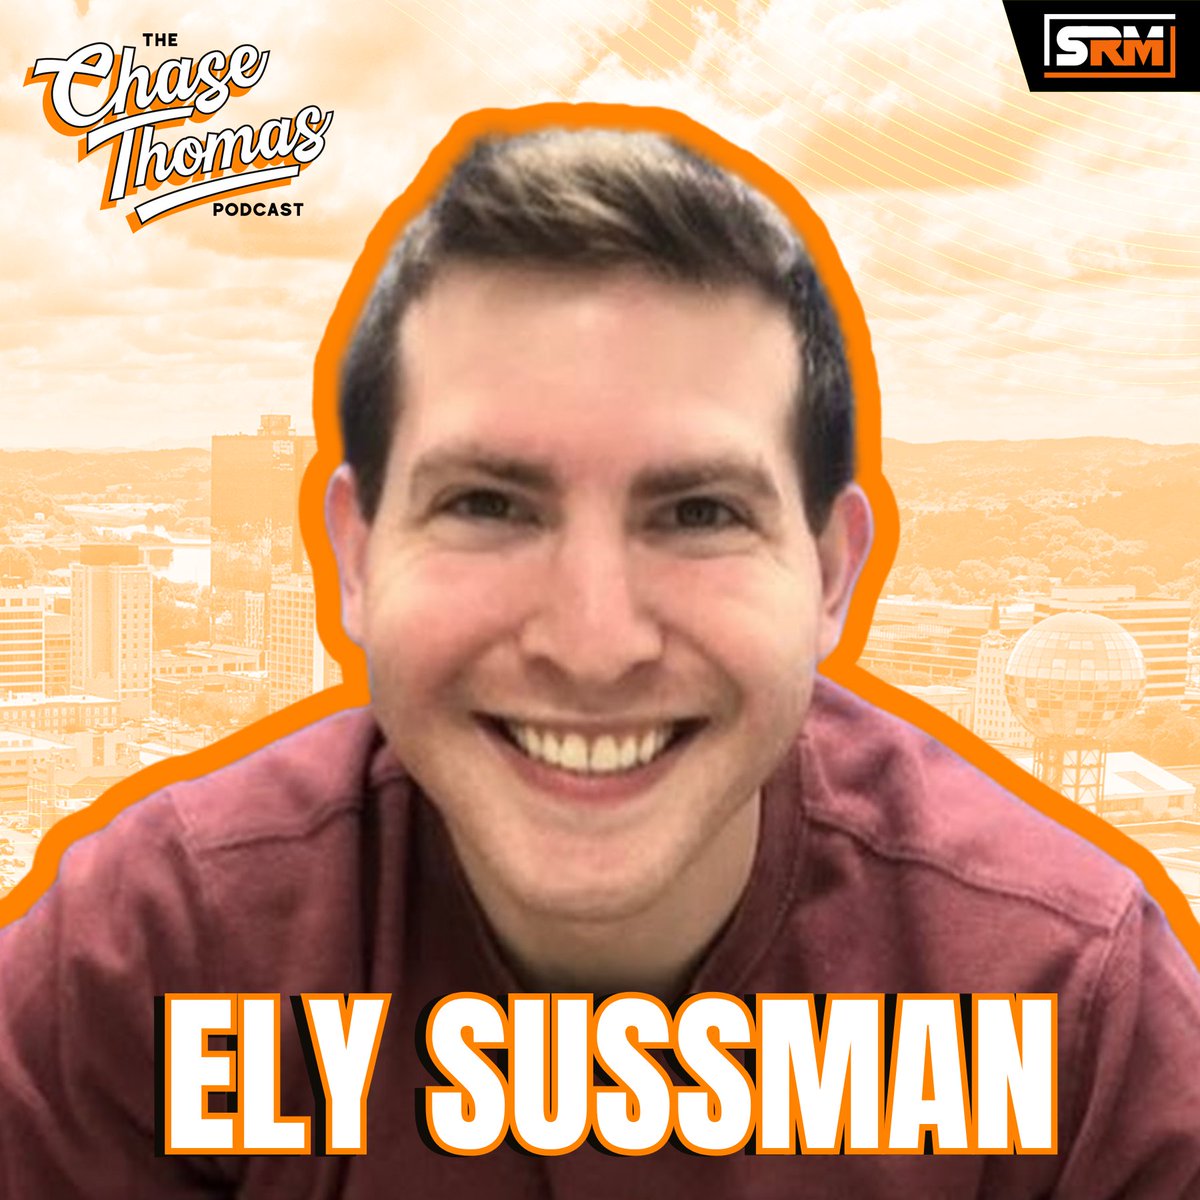 NEW CT Pod w/ @RealEly! —Fish On First's Ely Sussman! —How the Marlins had this terrible start —Where it went wrong with Kim Ng —Jazz Chisholm's future with Miami —Ryan Weathers is good! DL + Listen —> open.acast.com/public/streams…